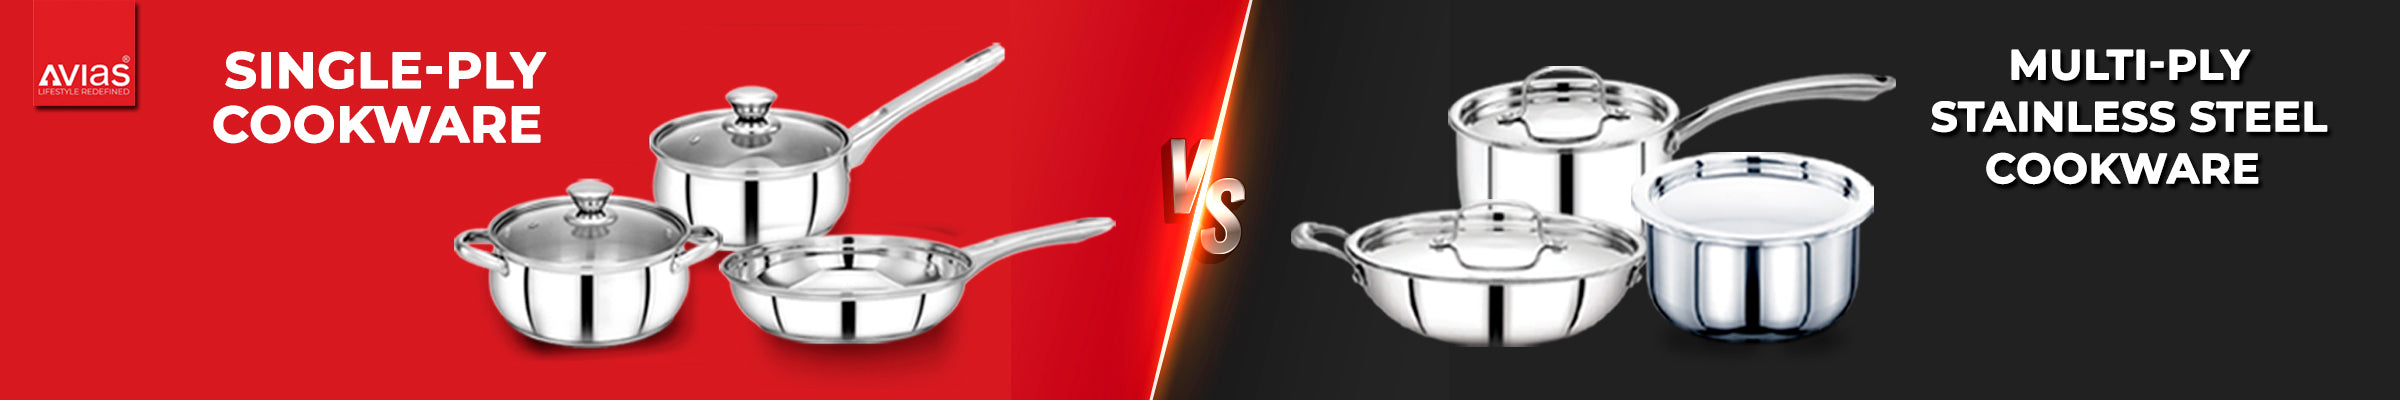 Single-Ply VS Tri-Ply Stainless Steel Cookware: Unveiling the Kitchen Essentials of Avias India best stainless steel cookware